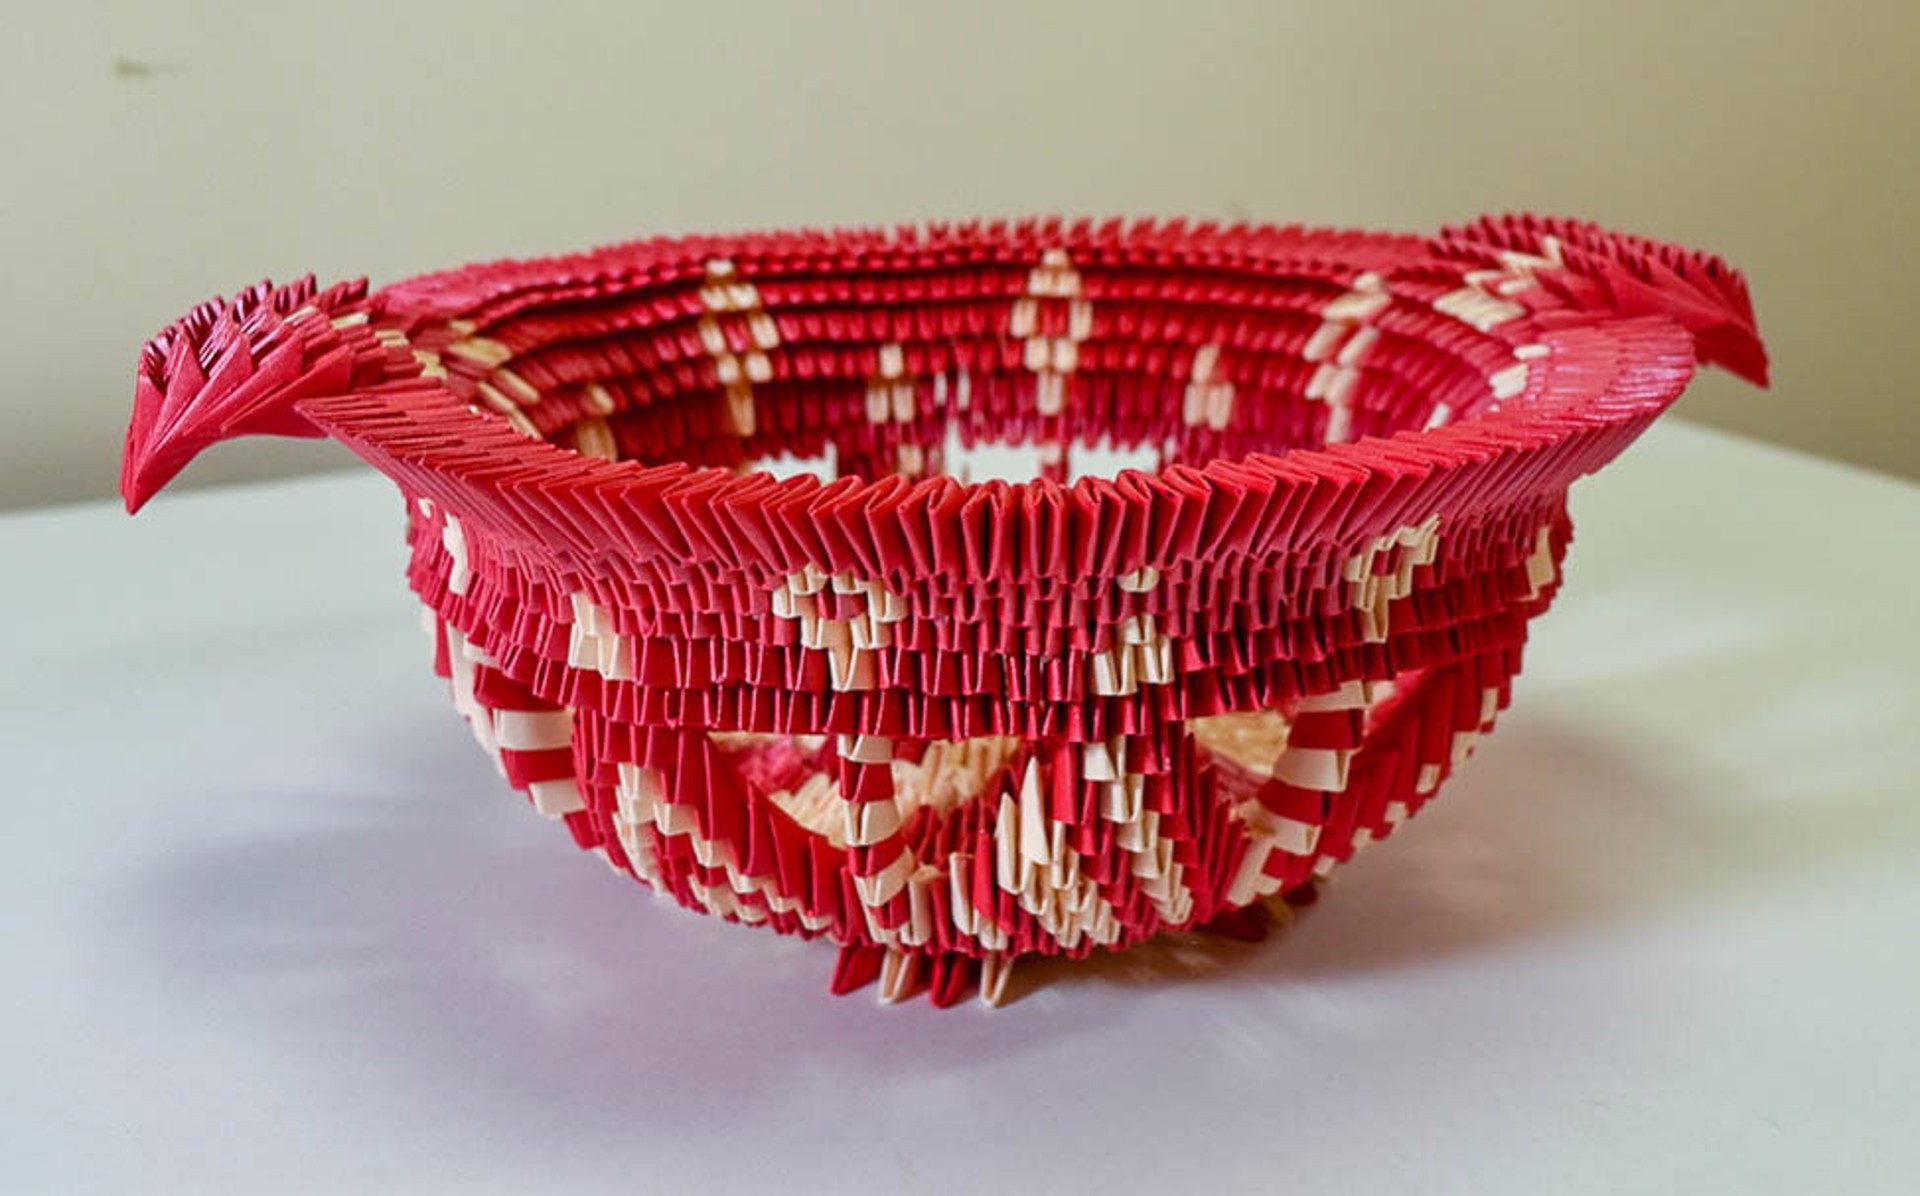 Origami Bowl Approx 1200 pieces by Raul Chavez